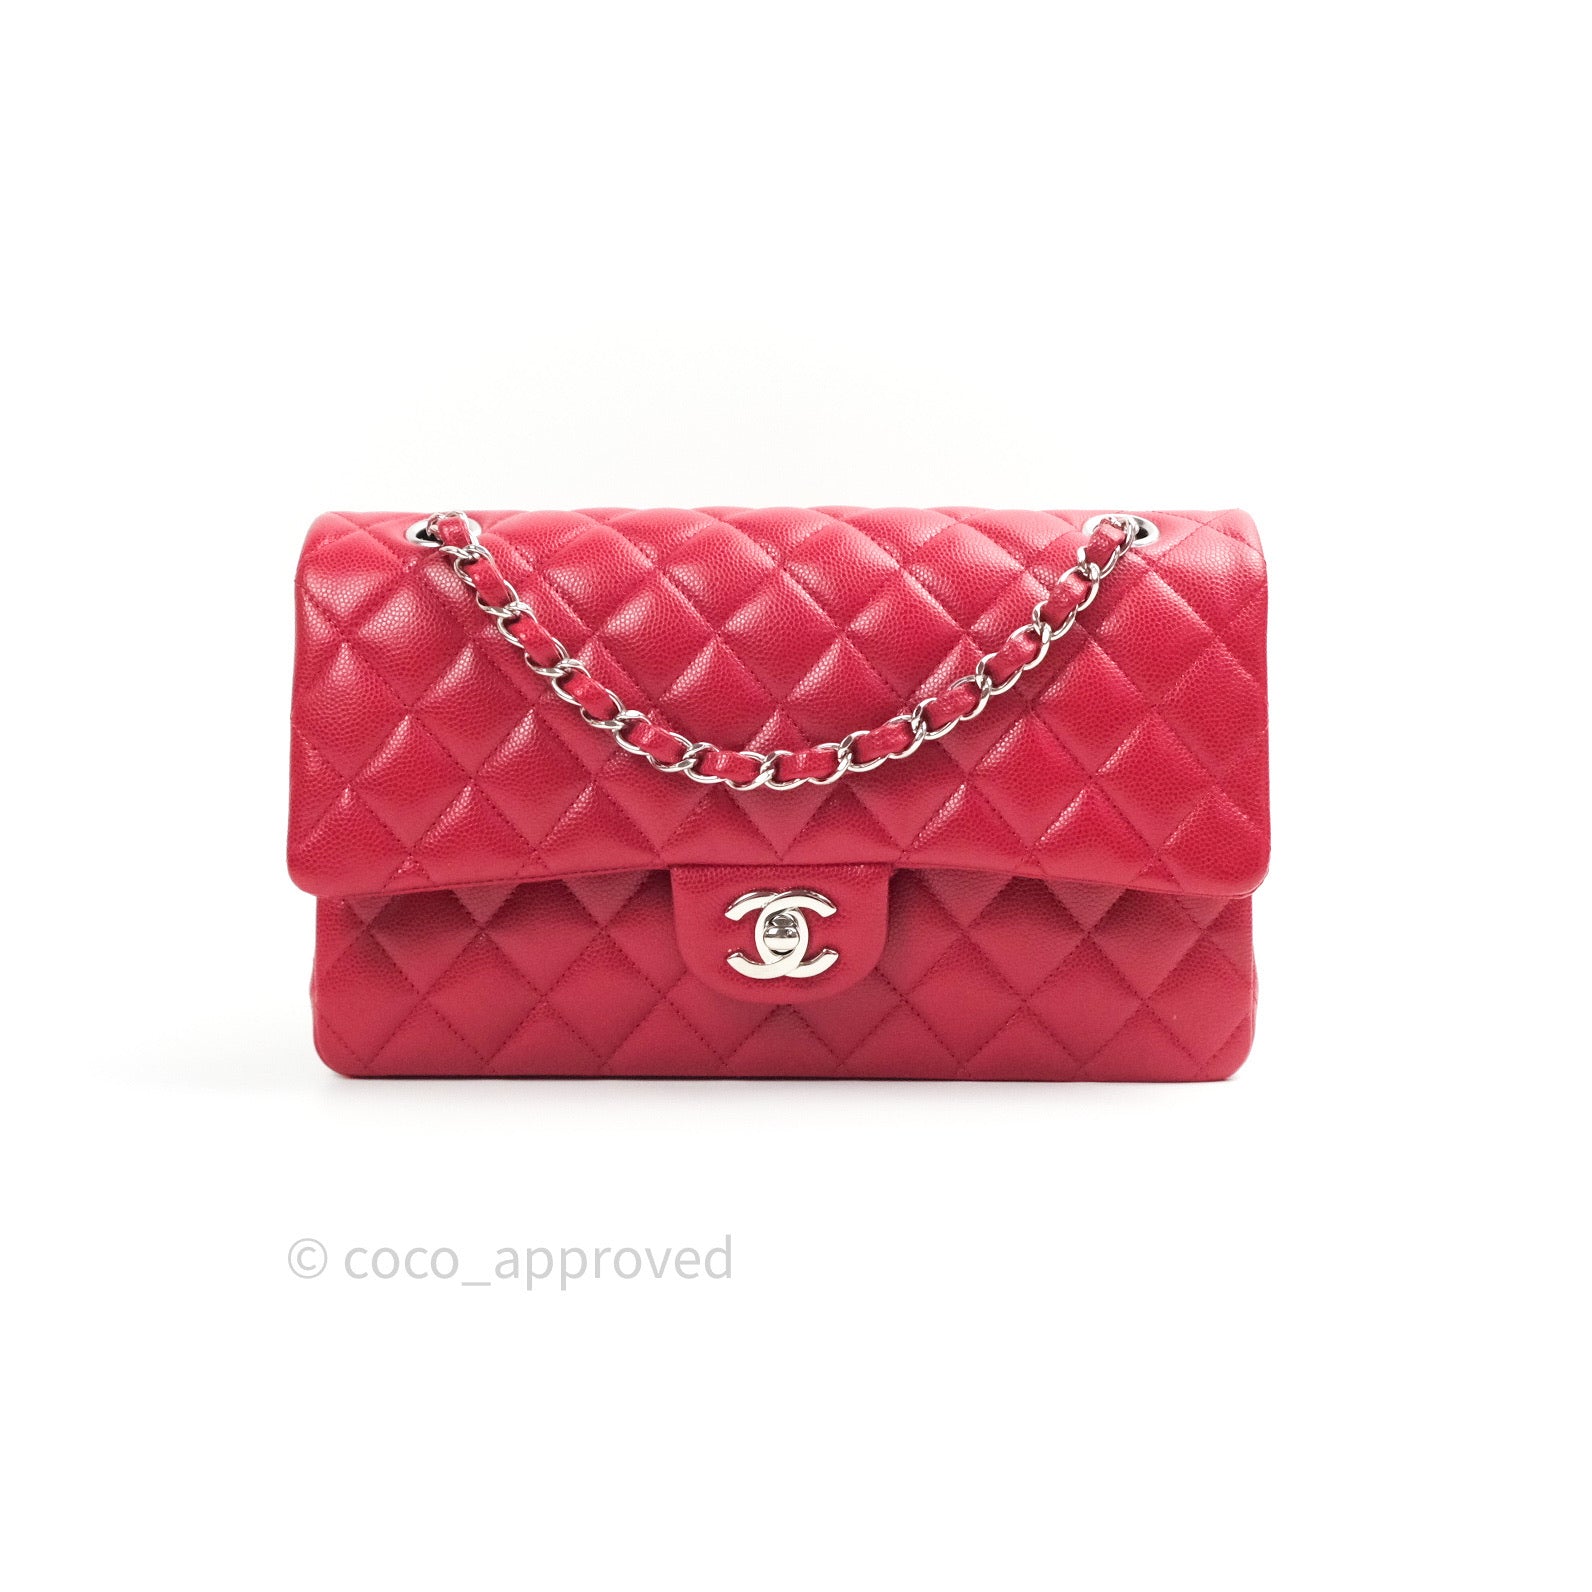 chanel red bag price